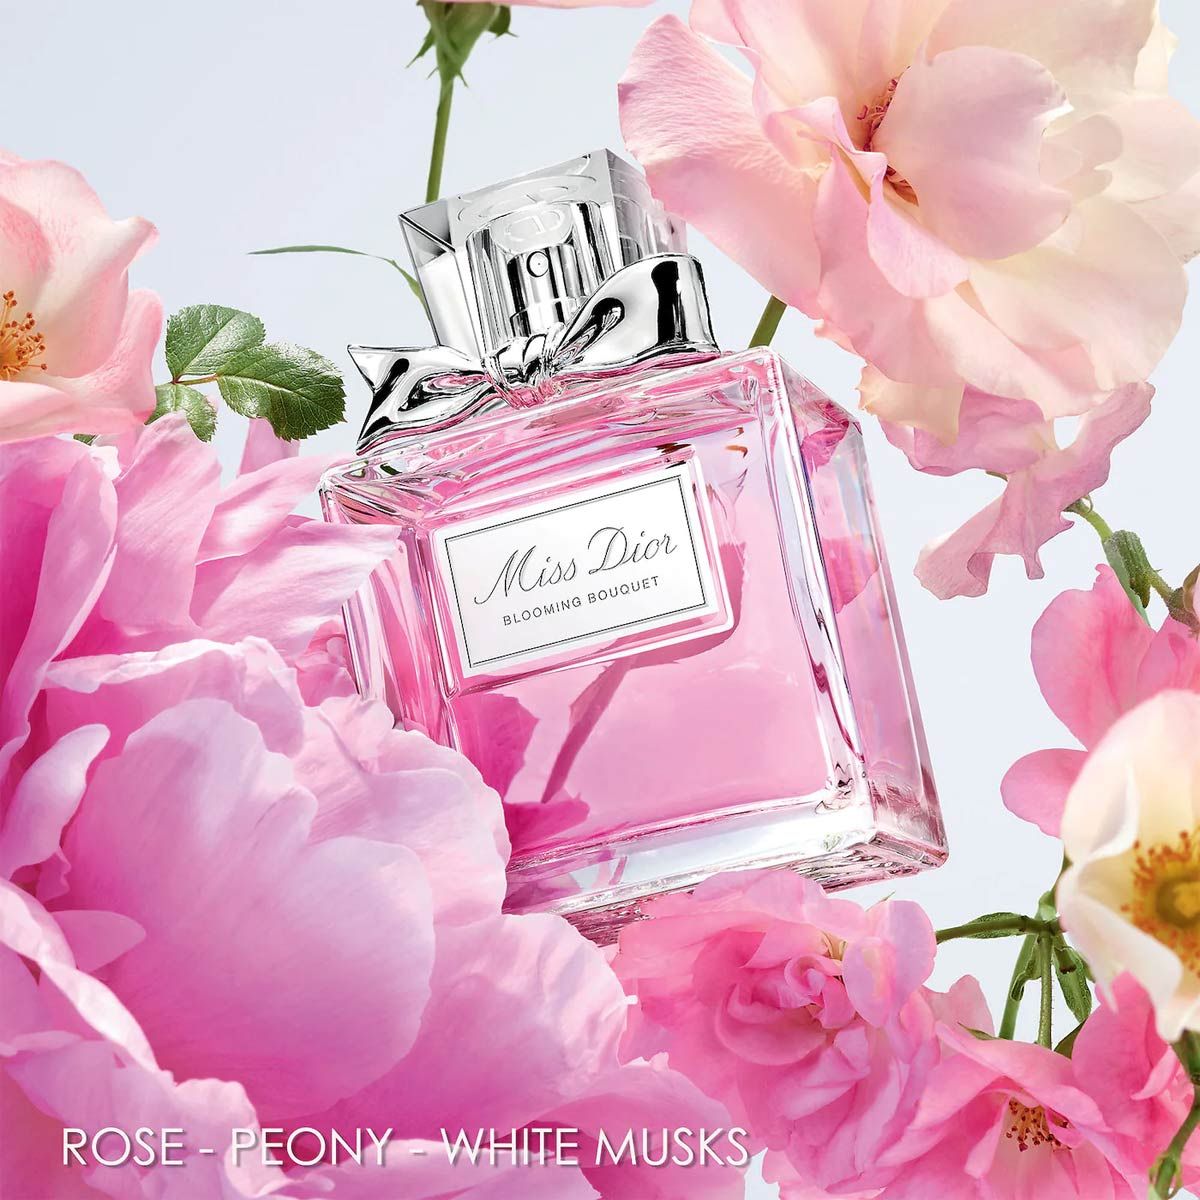  Dior Miss Dior Blooming Bouquet 